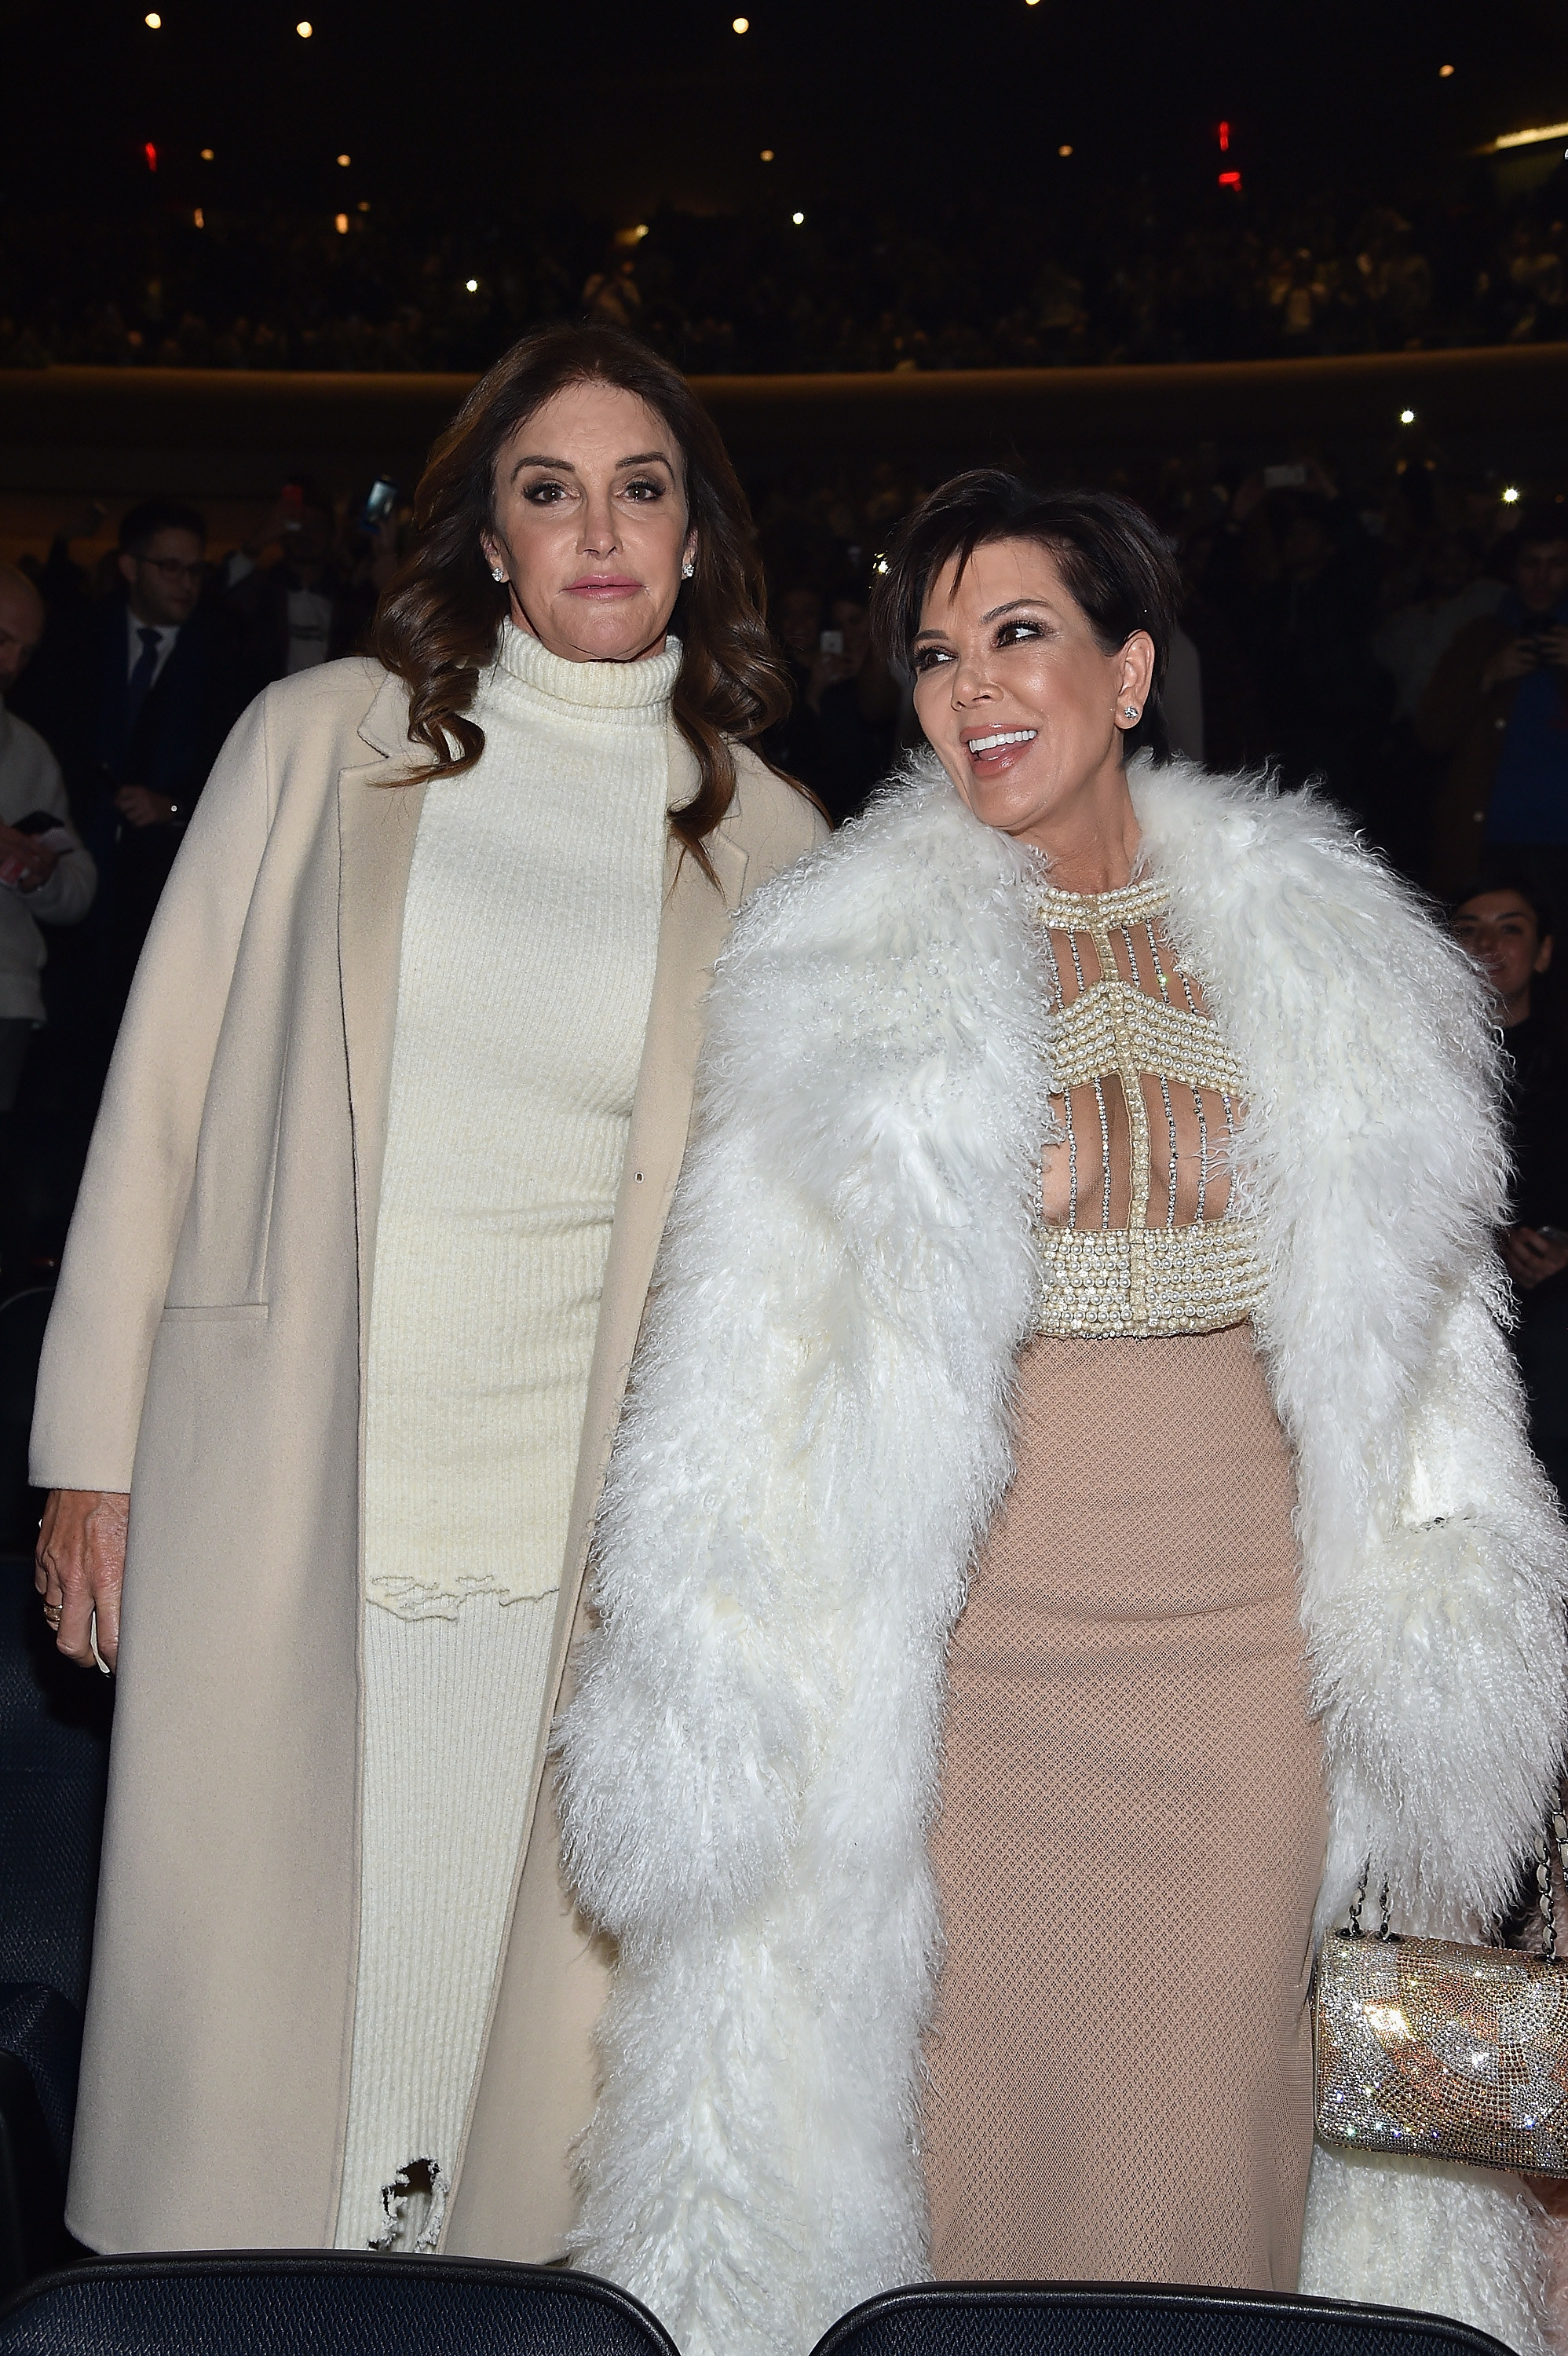 Caitlyn Jenner and Kris Jenner attend Yeezy Season 3 in New York City in February 2016